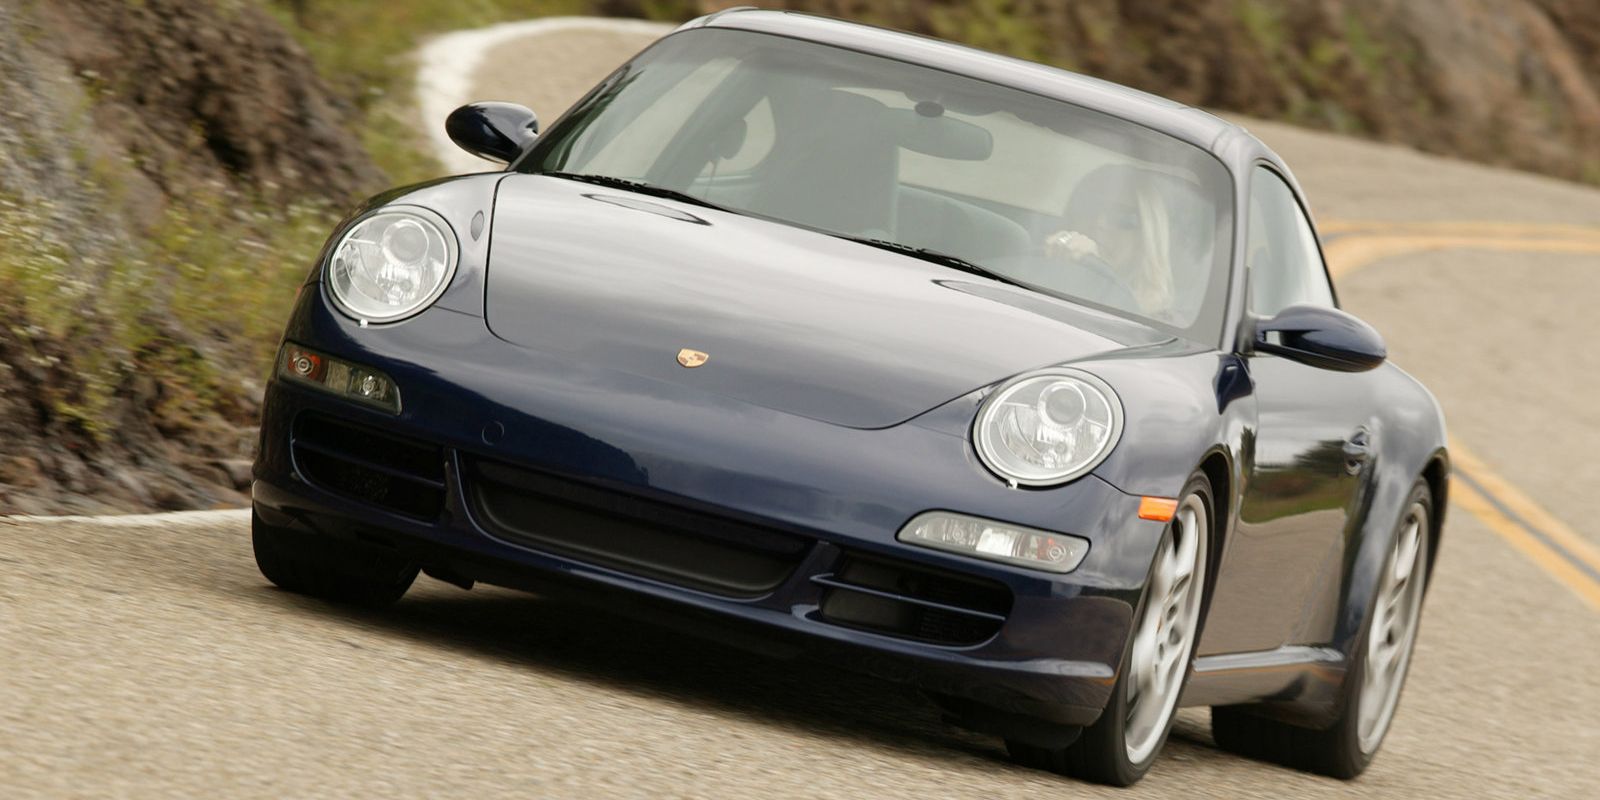 The 997 Carrera S Is the Perfect First Porsche